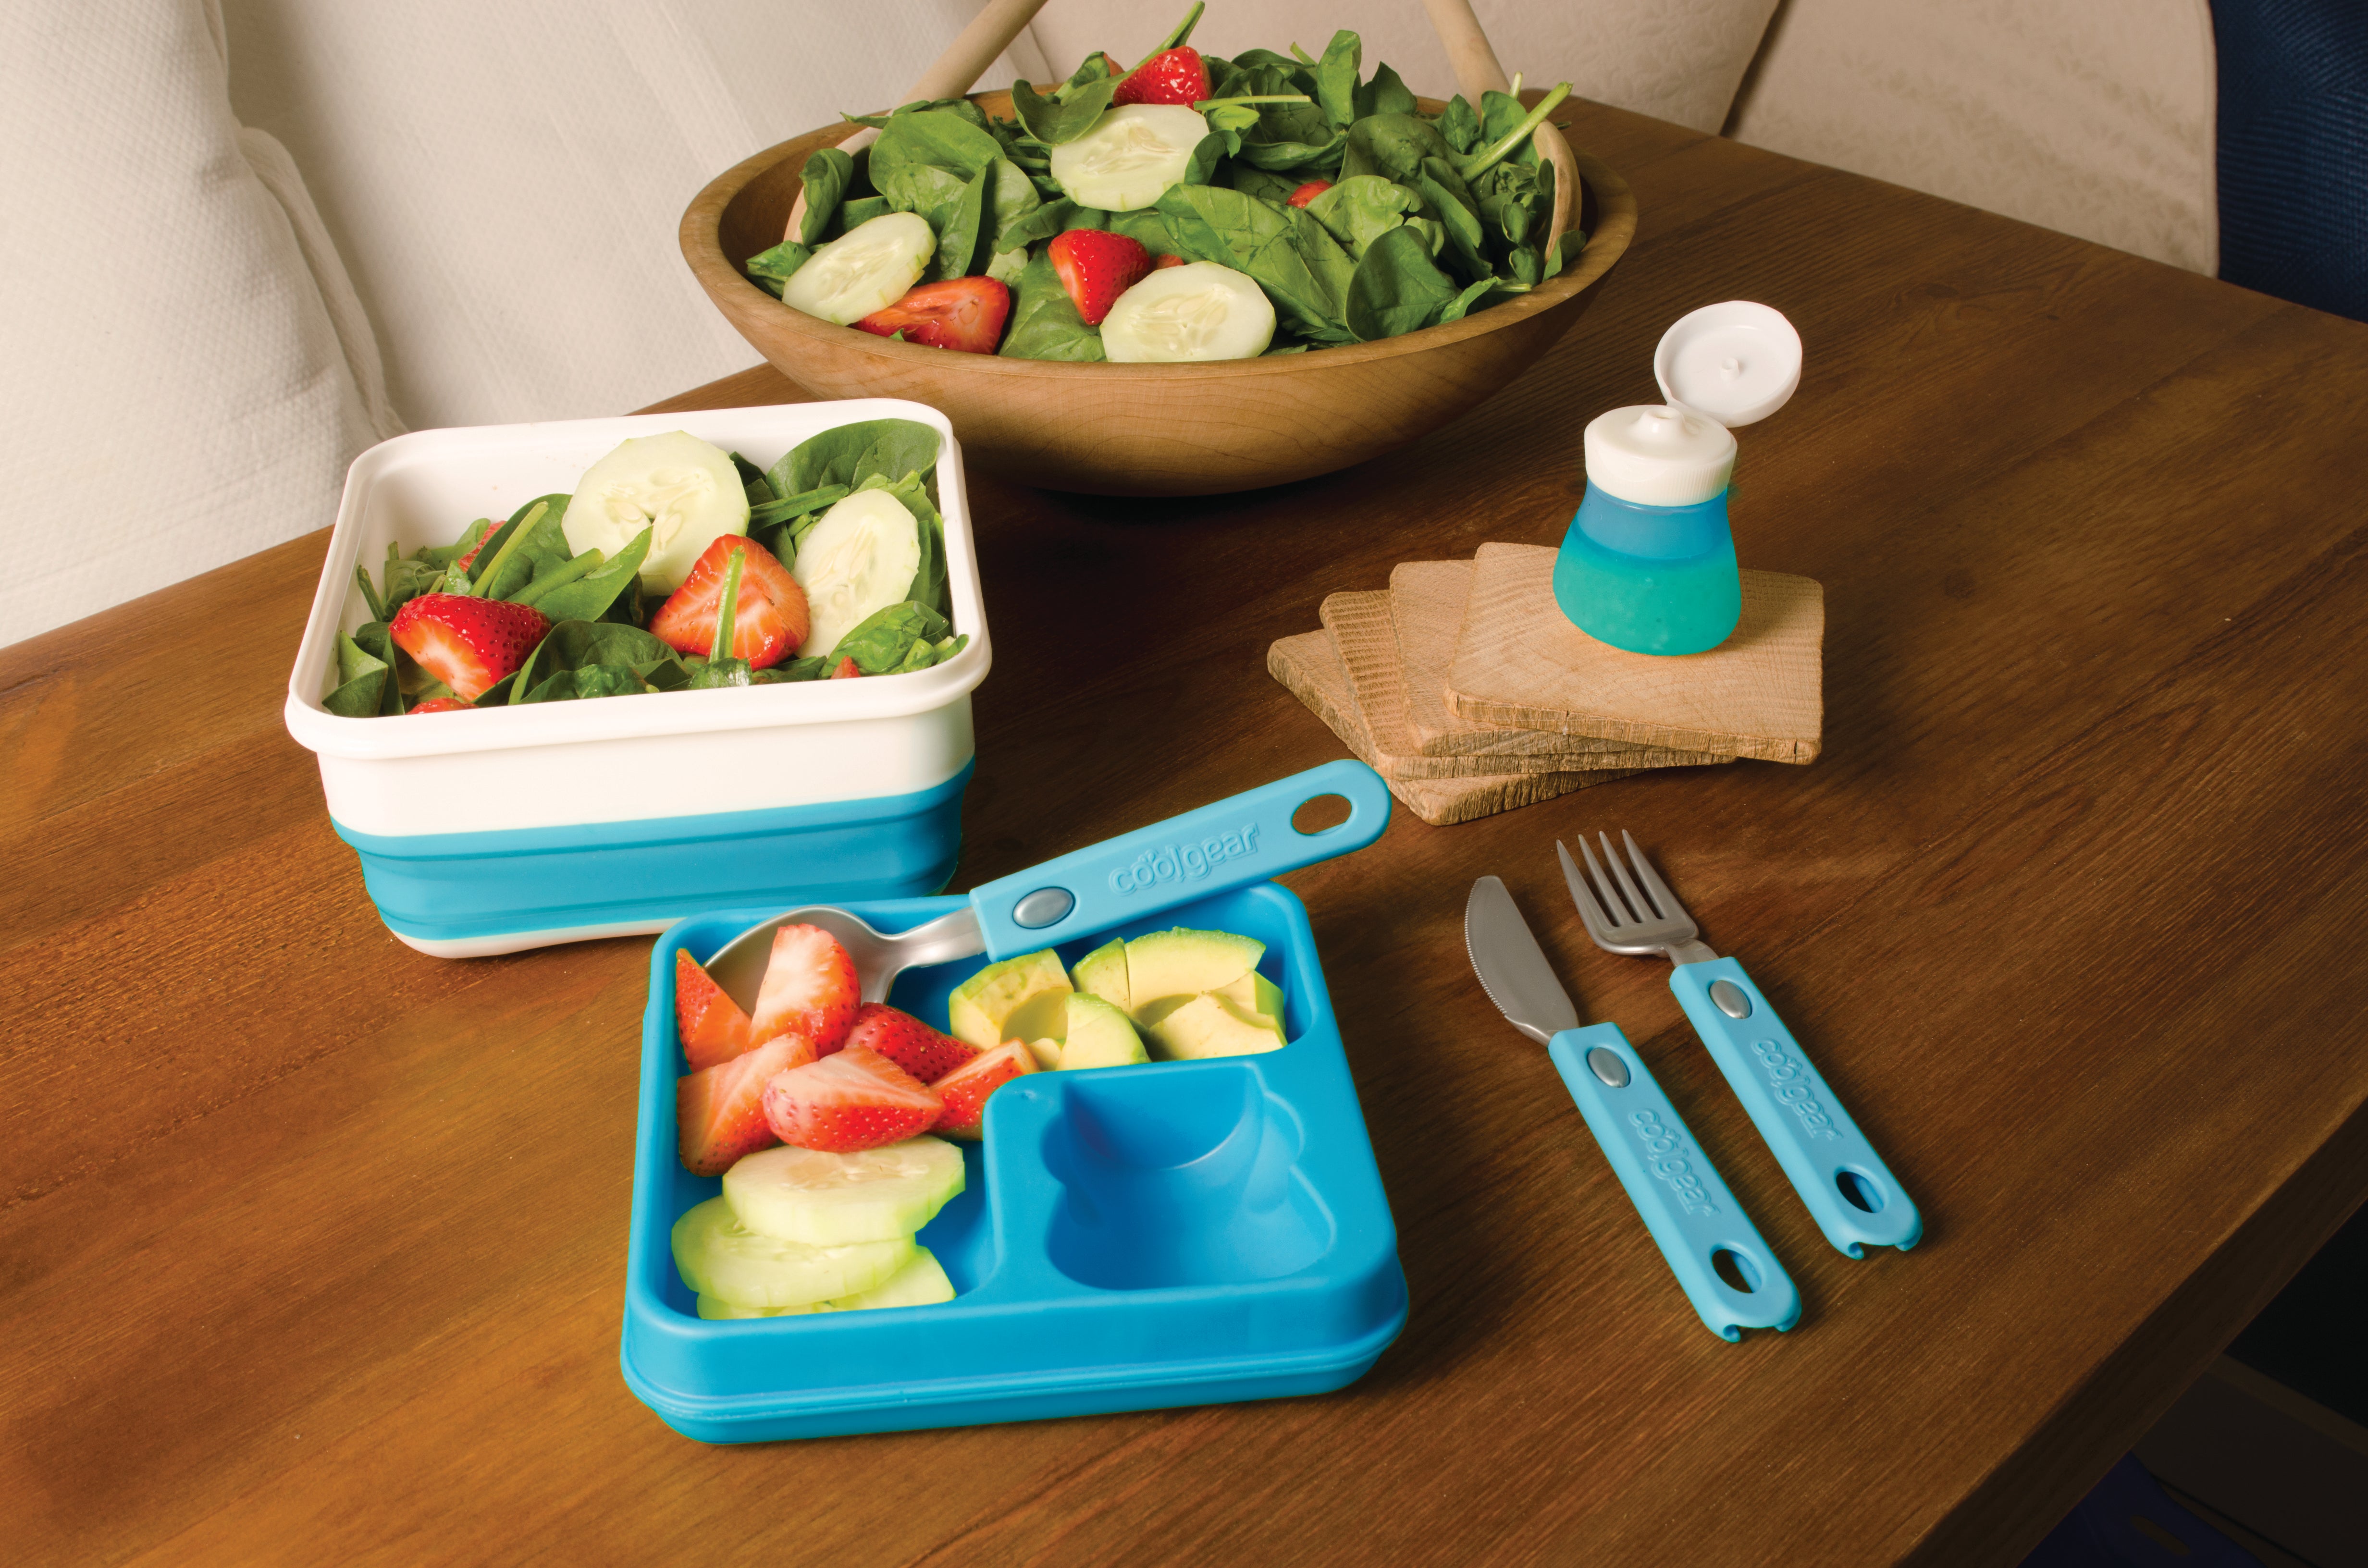 COOL GEAR 2-Pack Large Expandable To-Go Salad Kit Lunch Containers - Rectangle & Square - 52 oz Bowl with 3 Compartments for Salad Toppings and 2 oz Salad Dressing Bottle | Leakproof, Bento Meal P - image 3 of 3